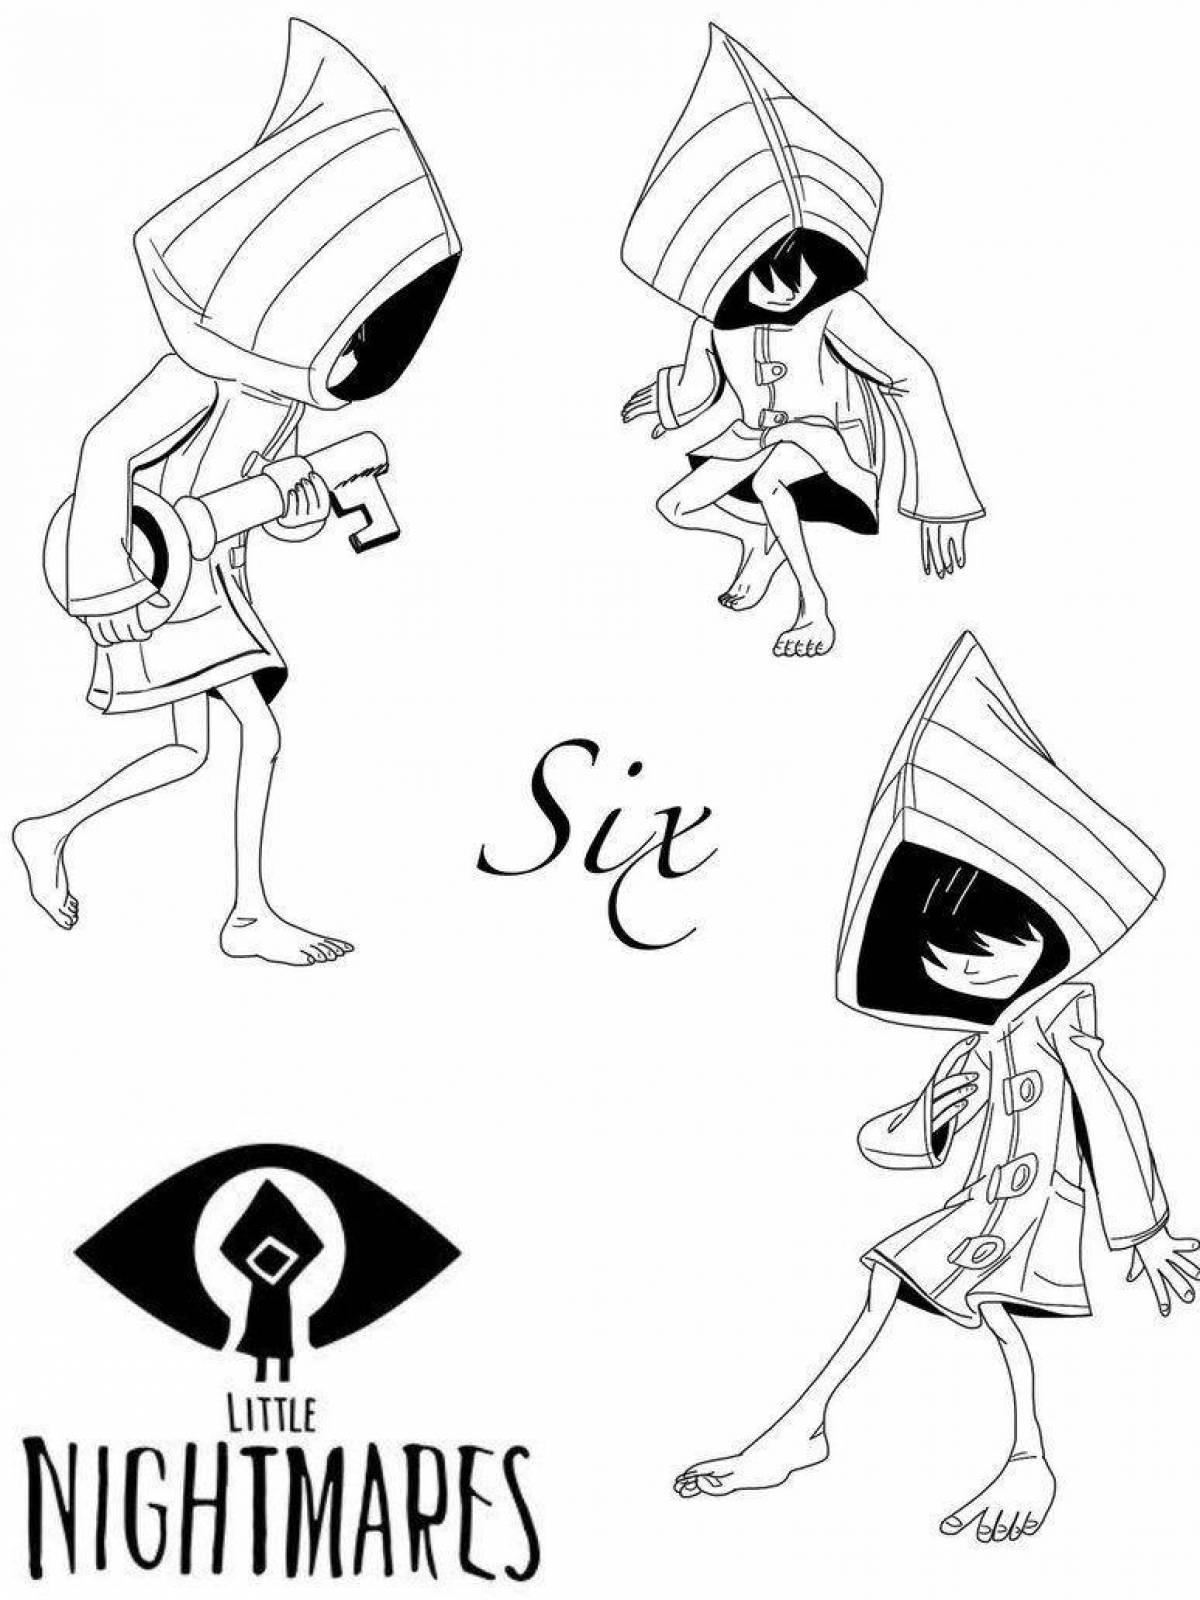 Awesome little nightmares coloring book